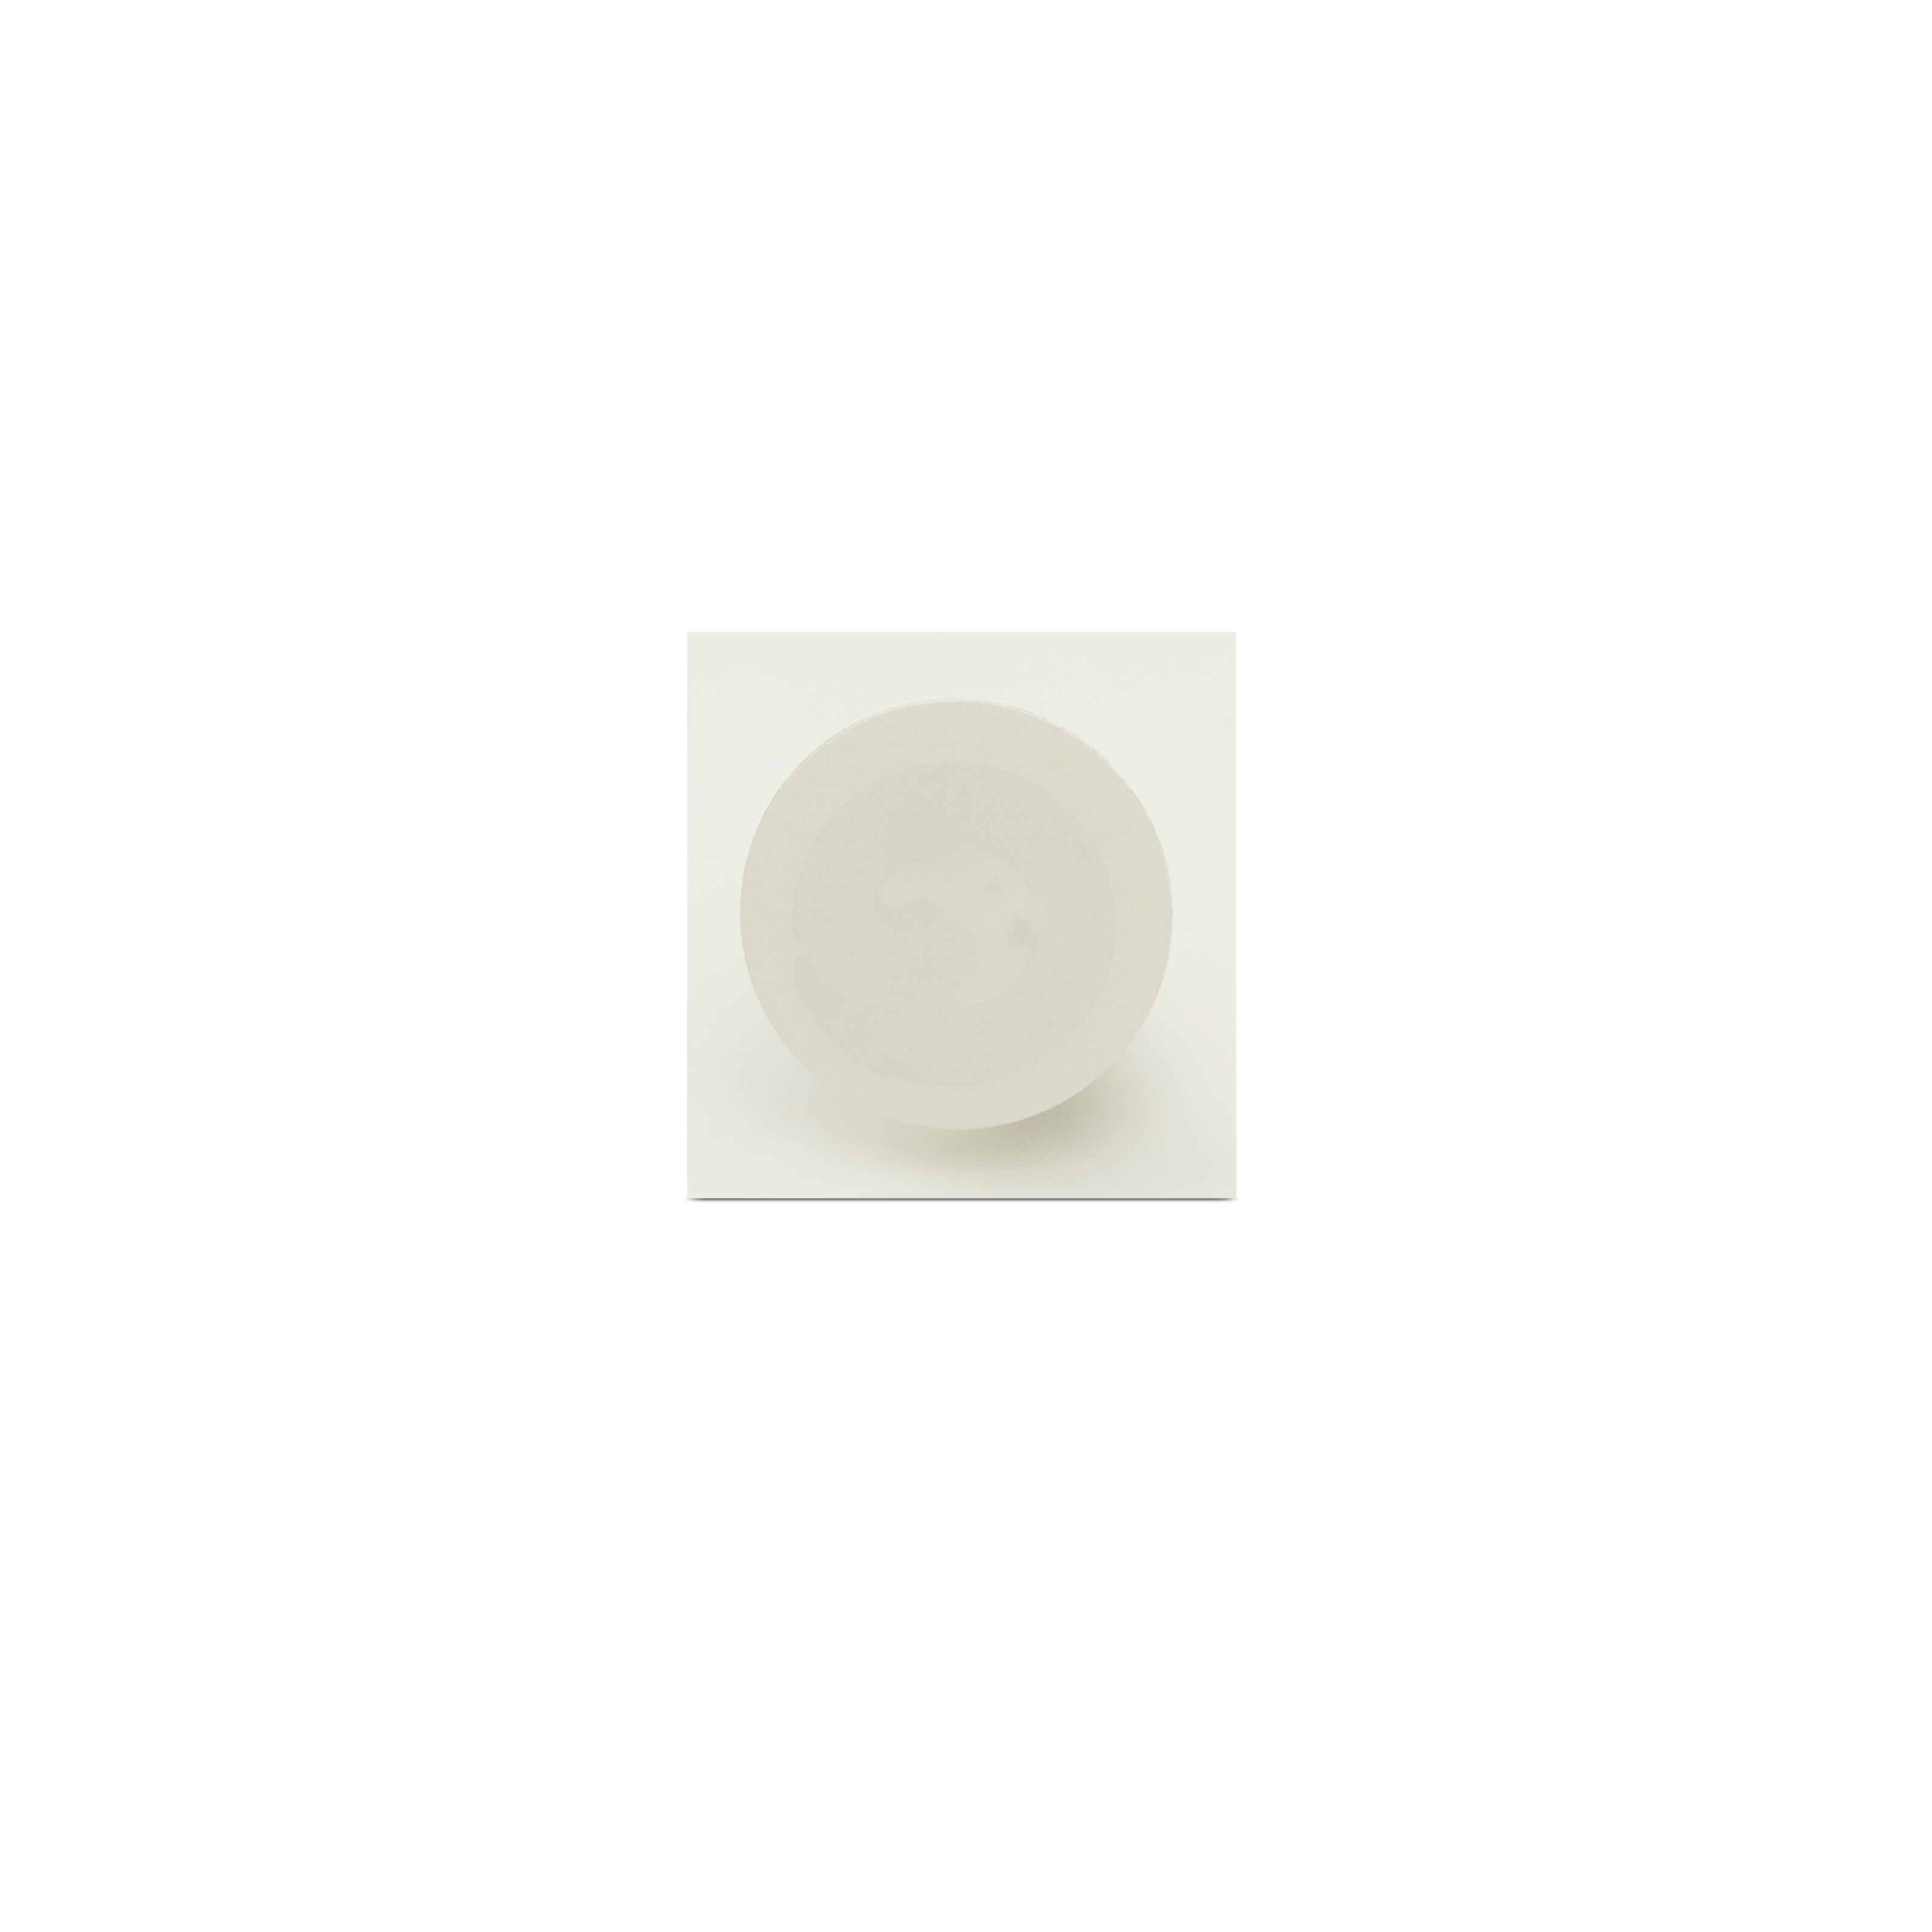 NFC security sticker PET - 18 mm - NTAG213 - 180 Byte - white